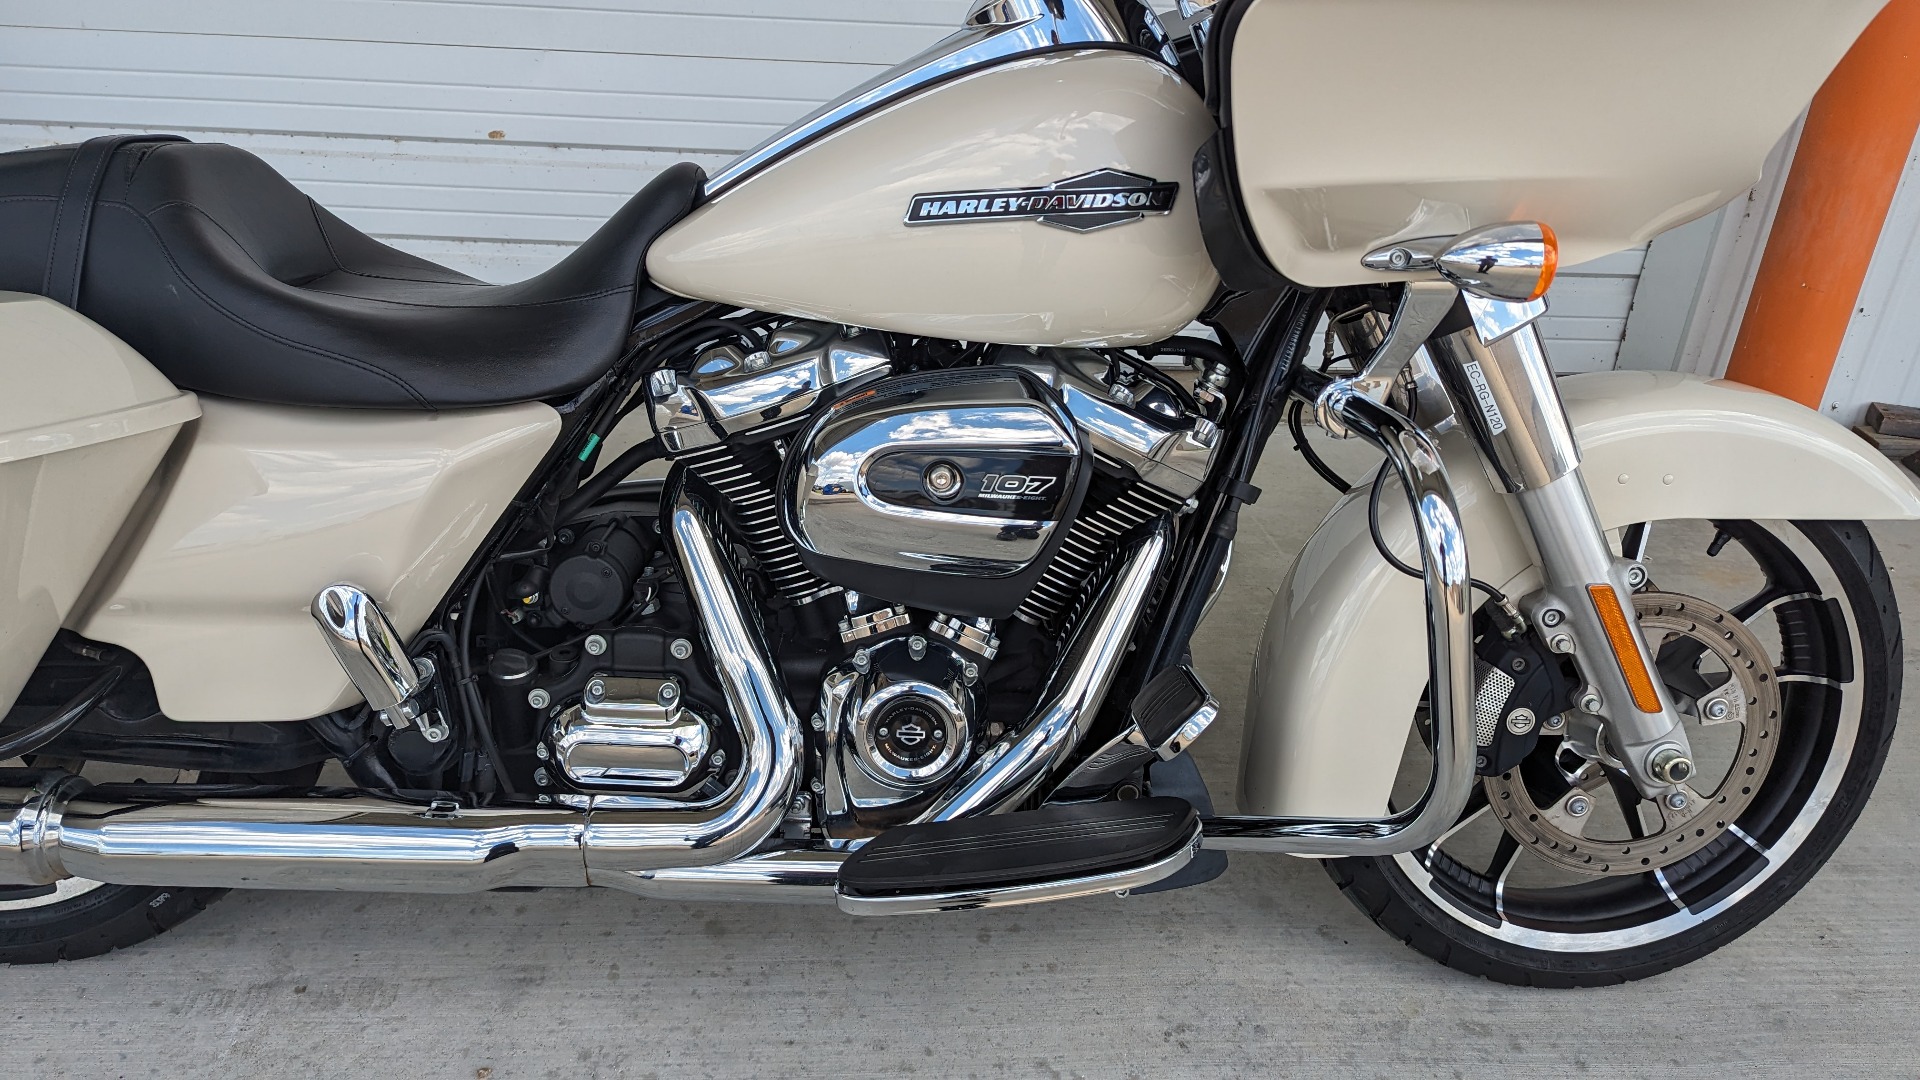 2022 harley davidson road glide for sale in texas - Photo 4